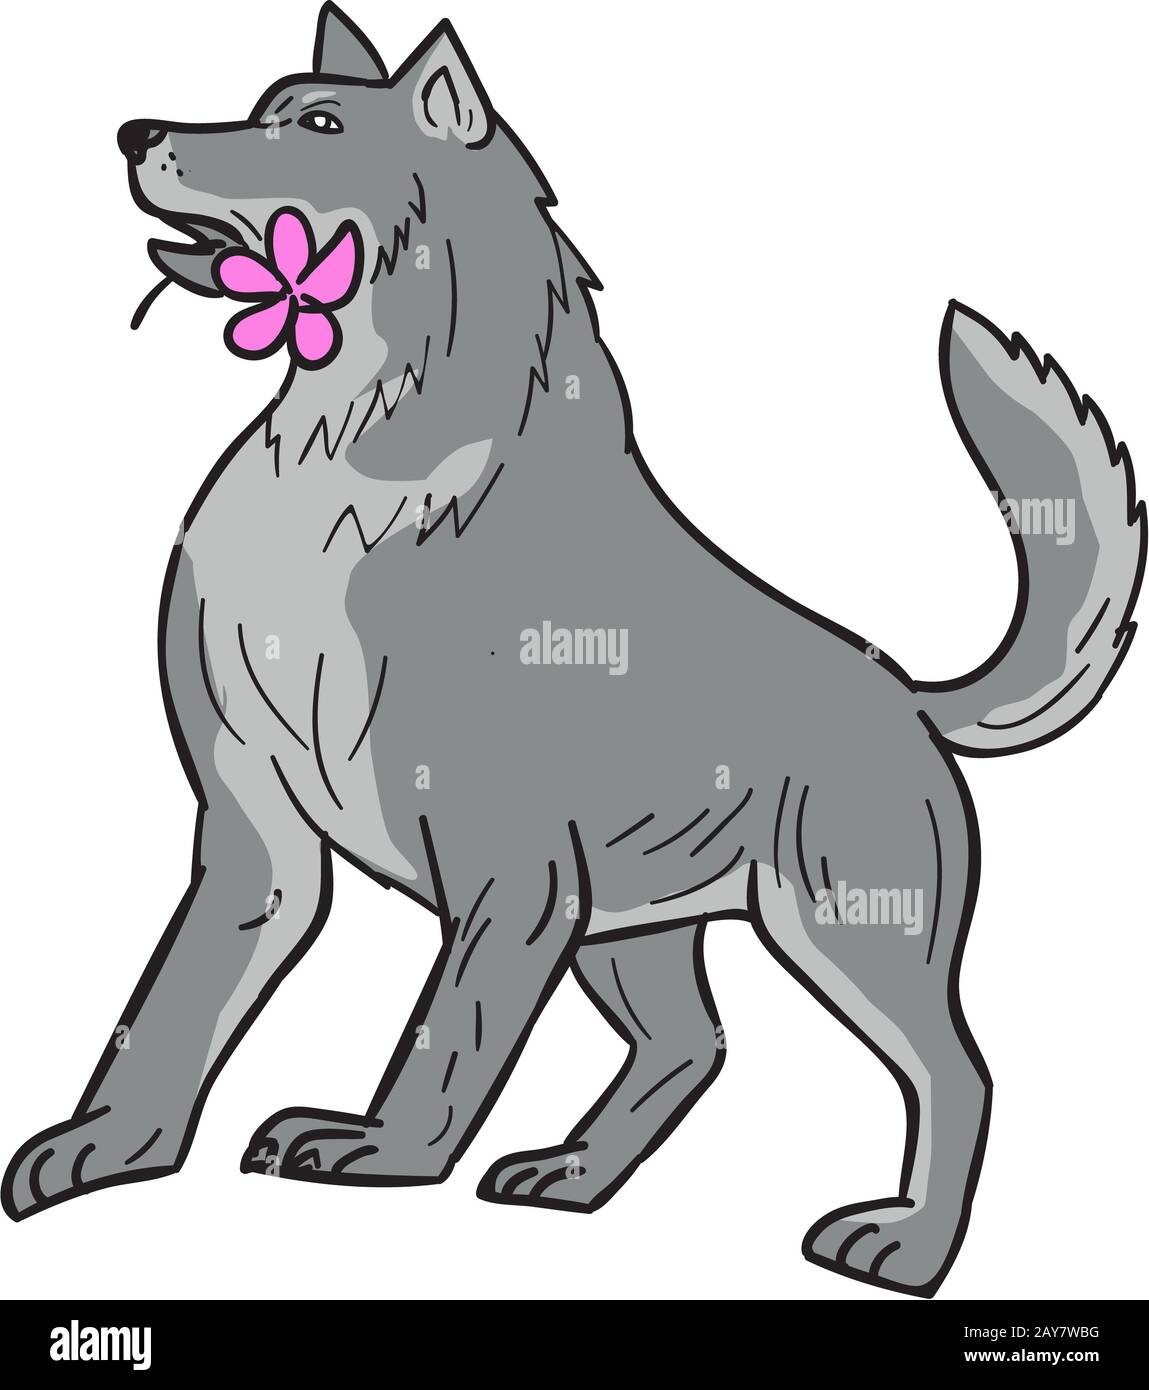 Timber Wolf Holding Plumeria Flower Dimensions Banque D'Images